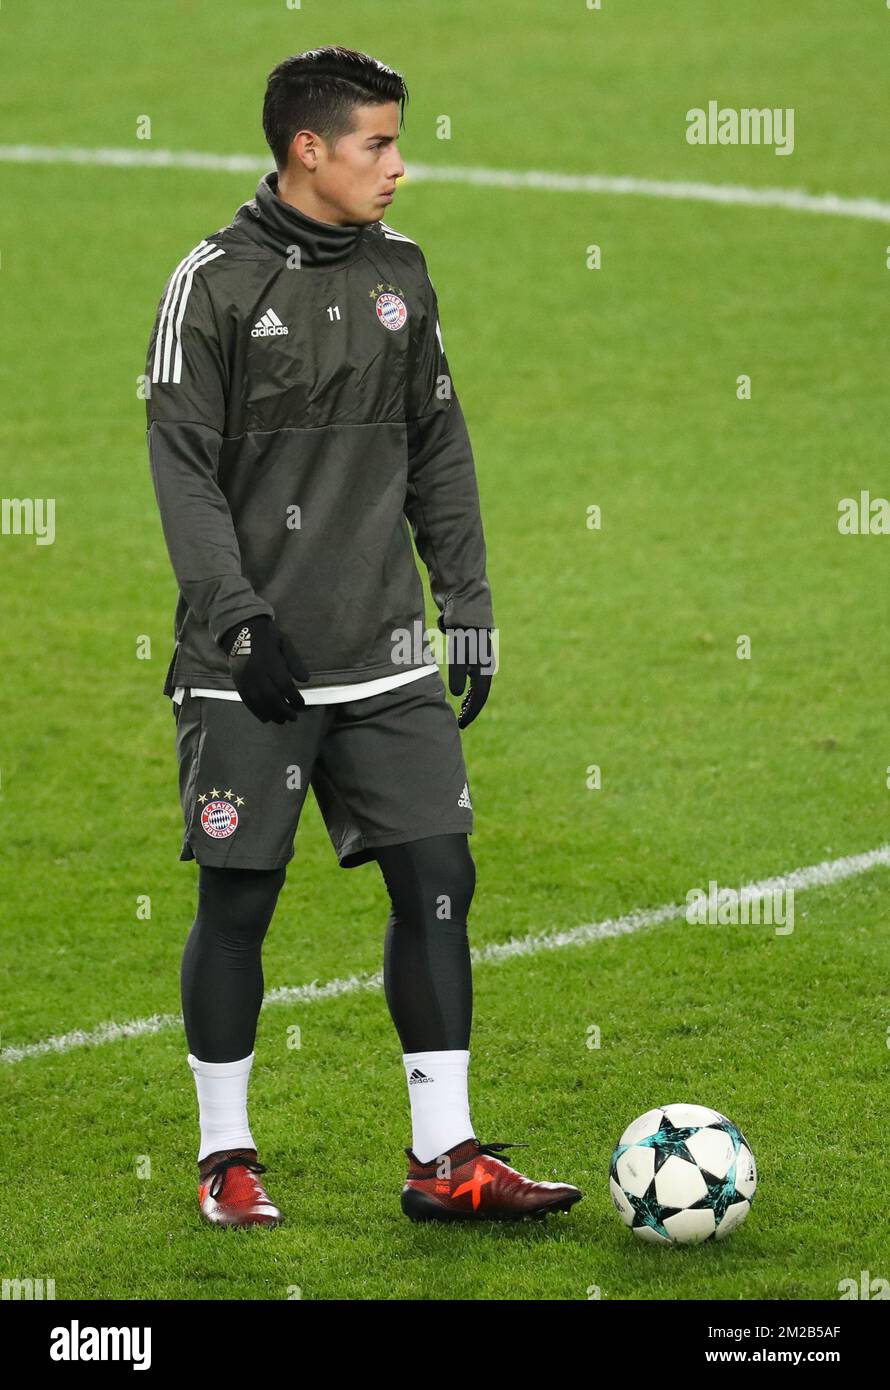 Bayern's James Rodriguez pictured during a training of German soccer team Bayern Munich, Tuesday 21 November 2017 in Brussels. Tomorrow Anderlecht is playing a game in the group stage (Group B) of the UEFA Champions League competition against Belgian RSC Anderlecht. BELGA PHOTO VIRGINIE LEFOUR Stock Photo